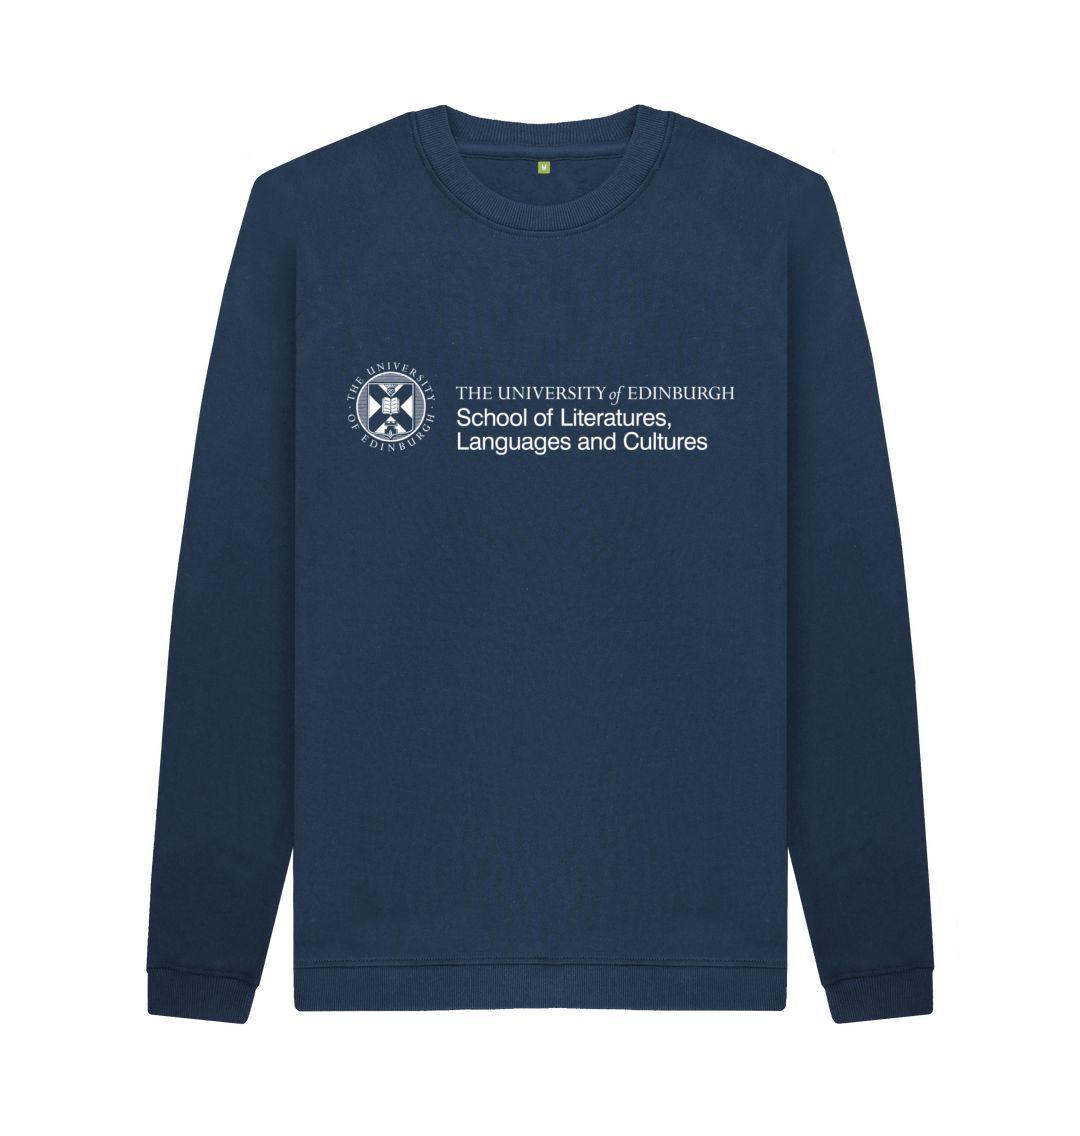 Navy sweatshirt with white University crest and text that reads ' University of Edinburgh School of Literatures, Languages and Cultures